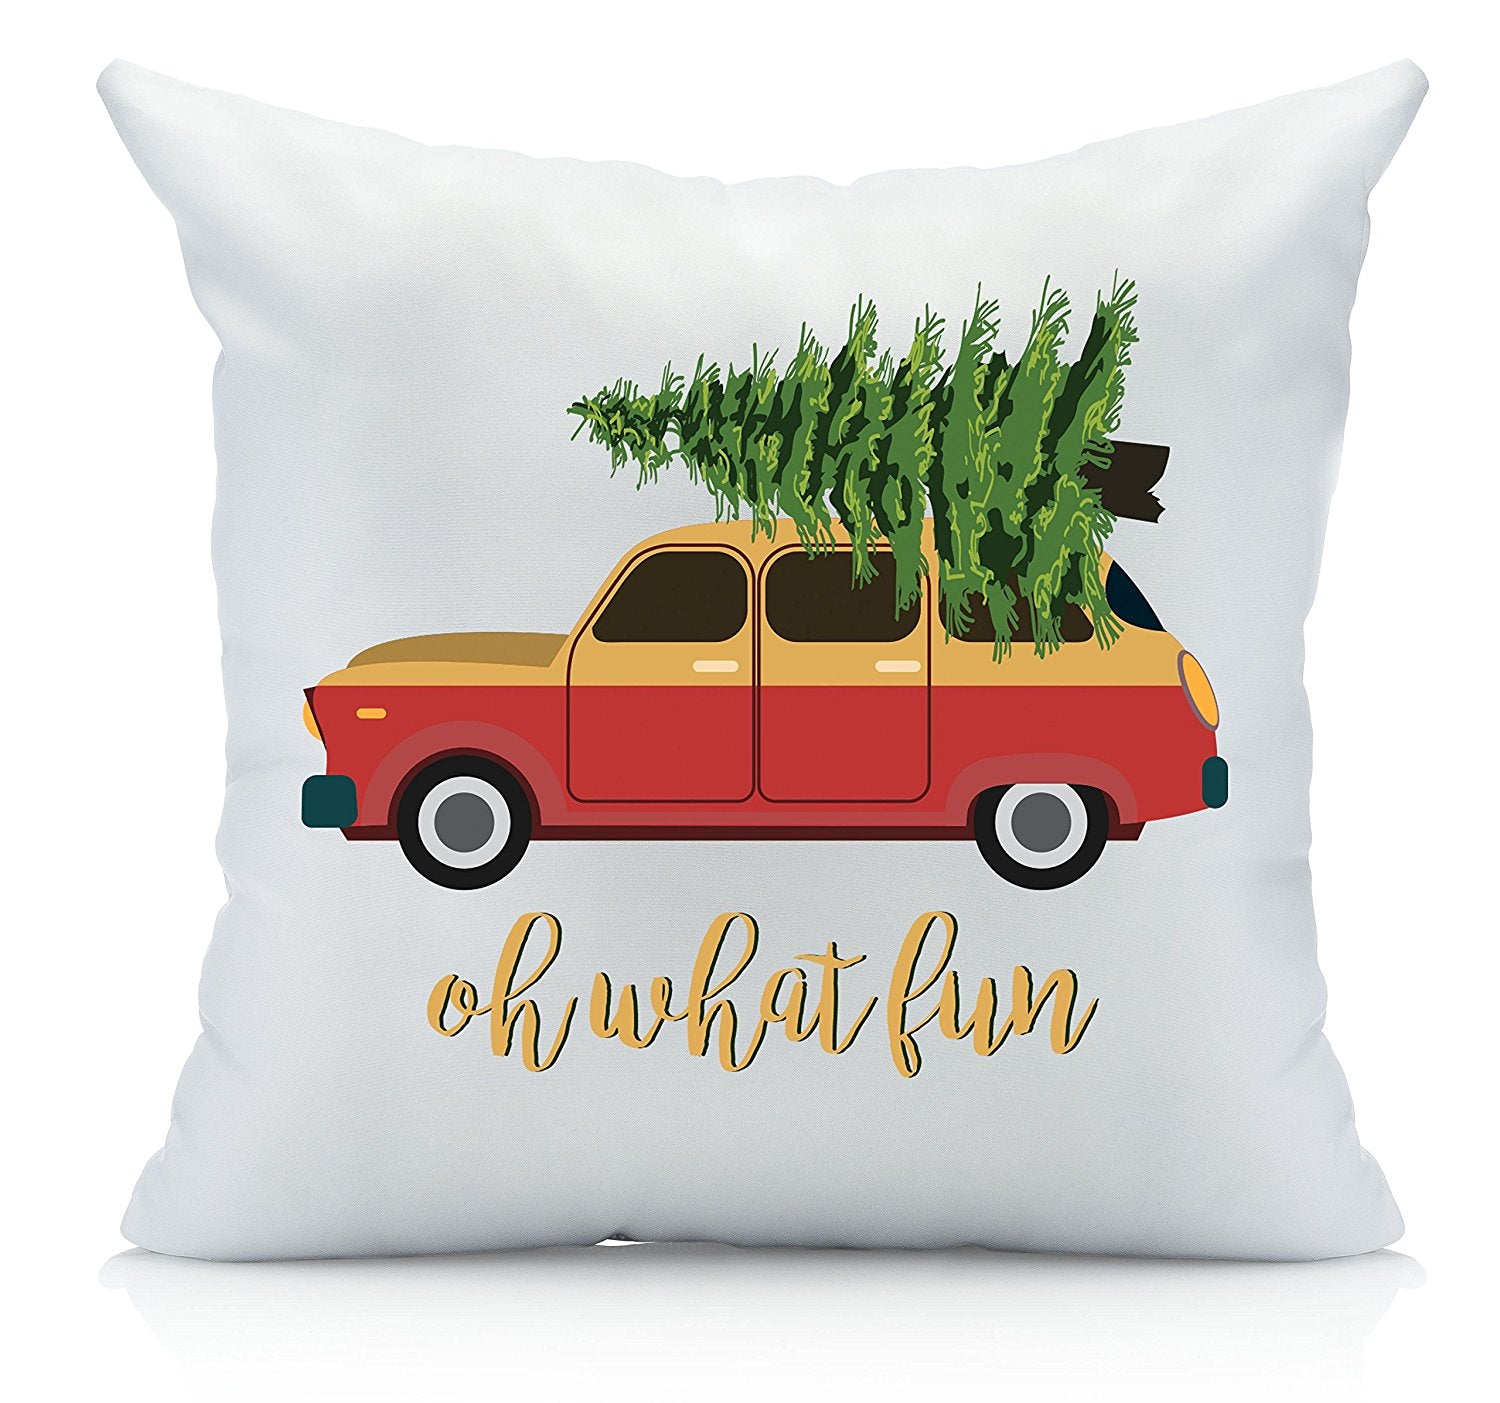 Oh What Fun Christmas Throw Pillow Cover Multicolor (1 18 by 18 Inches) Christmas Gifts